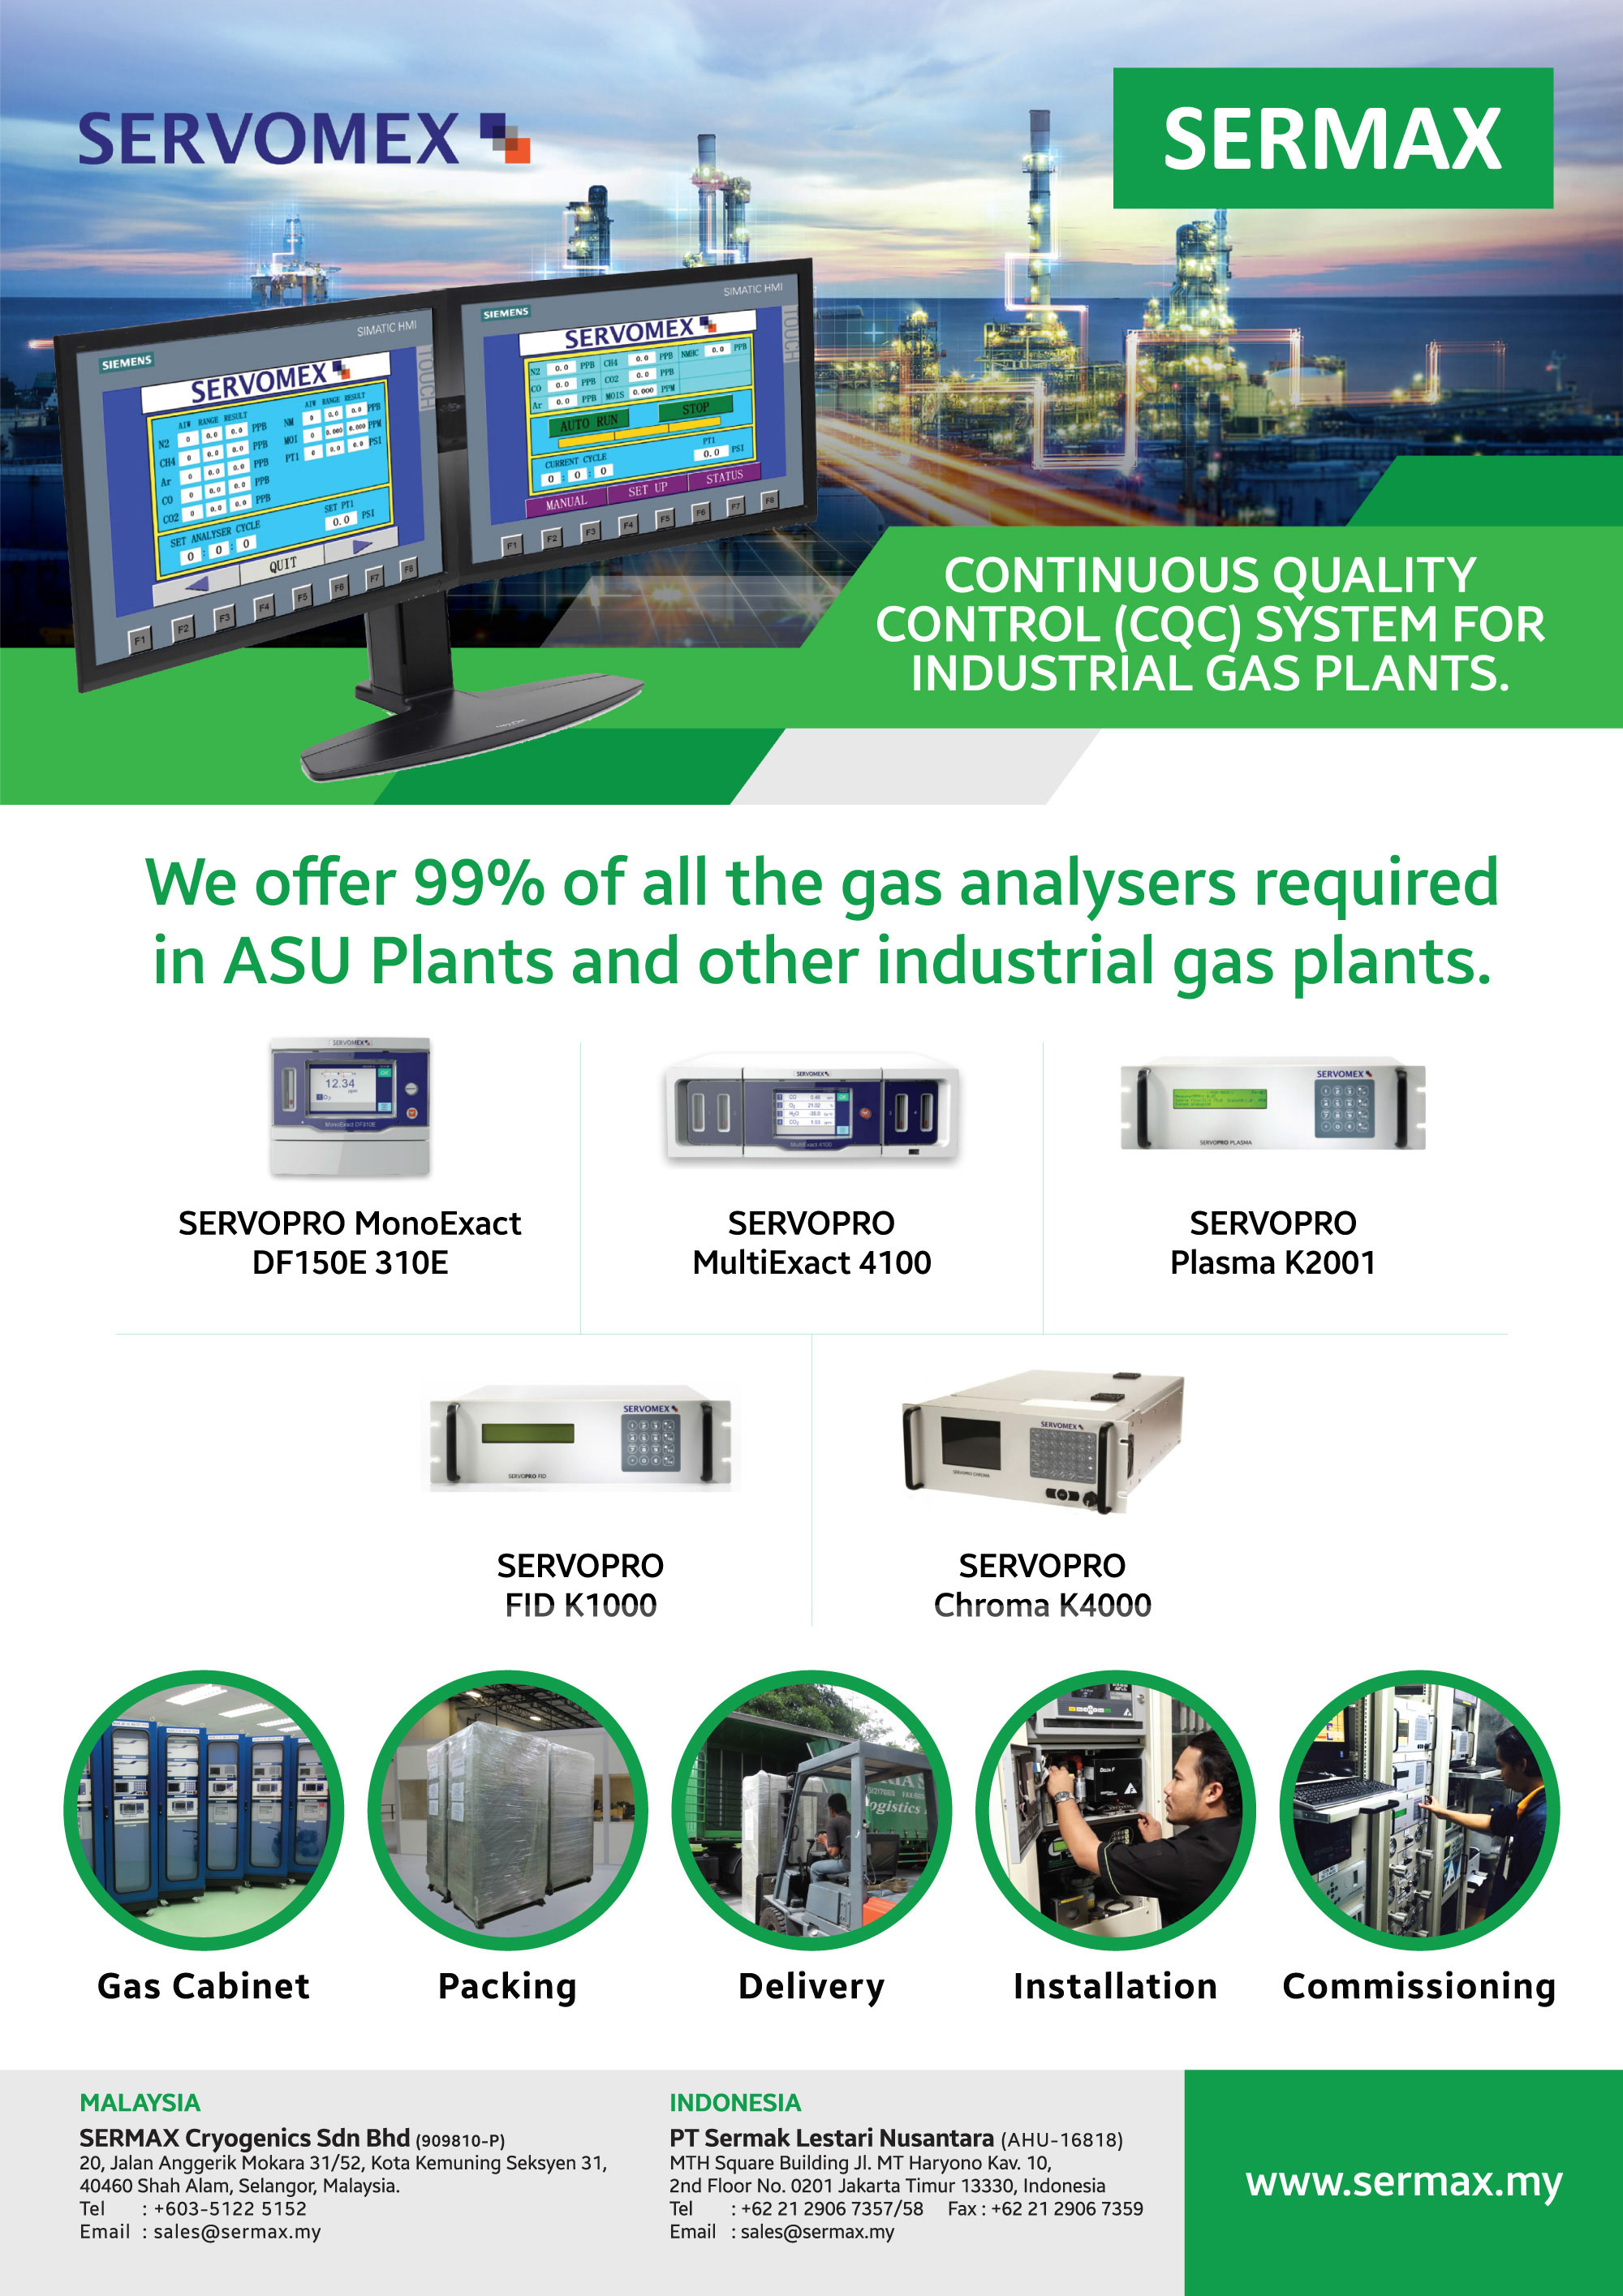 Sermax’s products for Cryogenic & Gas Industry - Sermax has been distributing the leading brands in the market for Cryogenic & Gas industry since our inception.